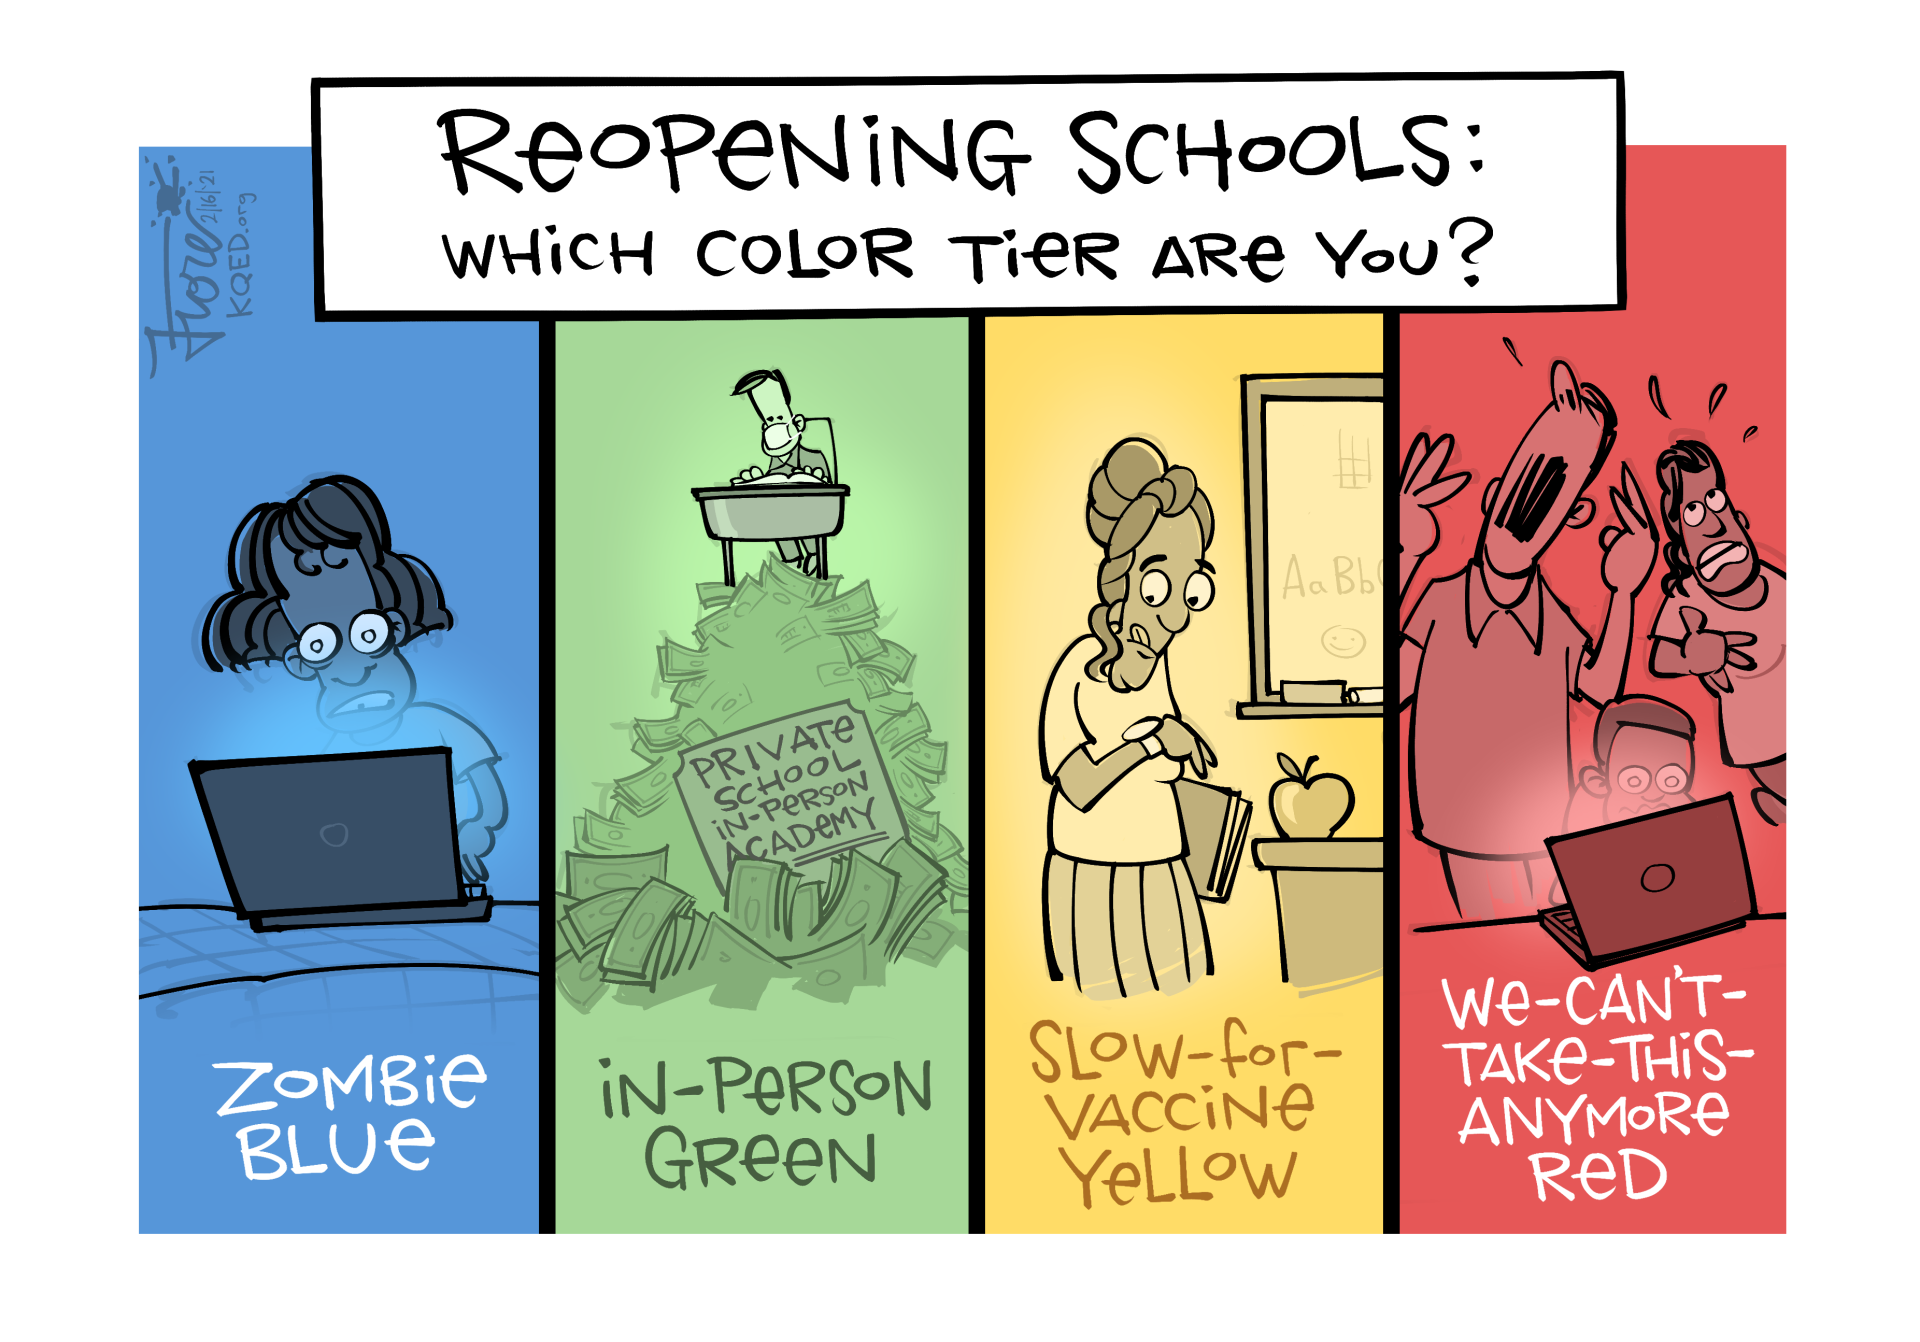 A Mark Fiore cartoon showing different color tiers for reopening schools, starting with Zombie Blue (online school), then In-Person Green (private schools), then Slow-for-Vaccine Yellow (cautious teachers), then We-Can't-Take-This-Anymore Red for fed up parents.